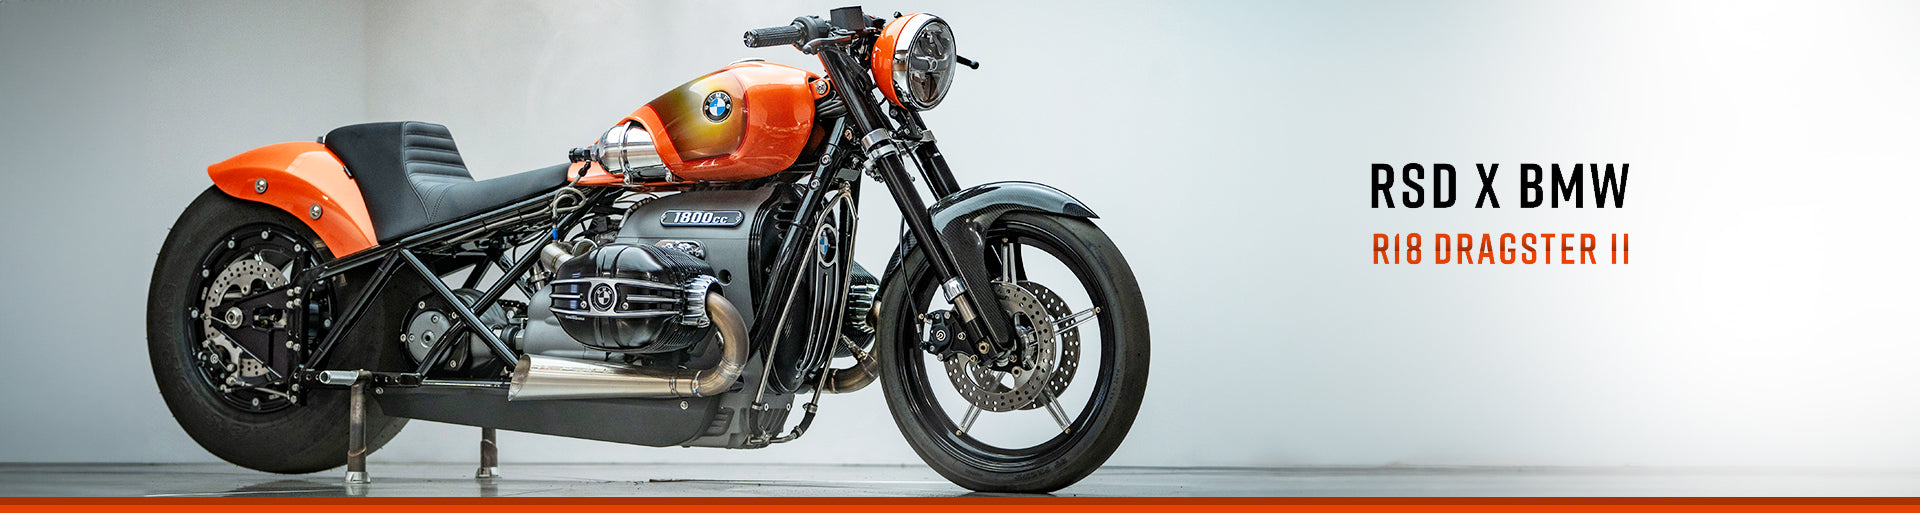 front 3/4 photo of the orange RSD x BMW R18 Dragster II motorcycle.